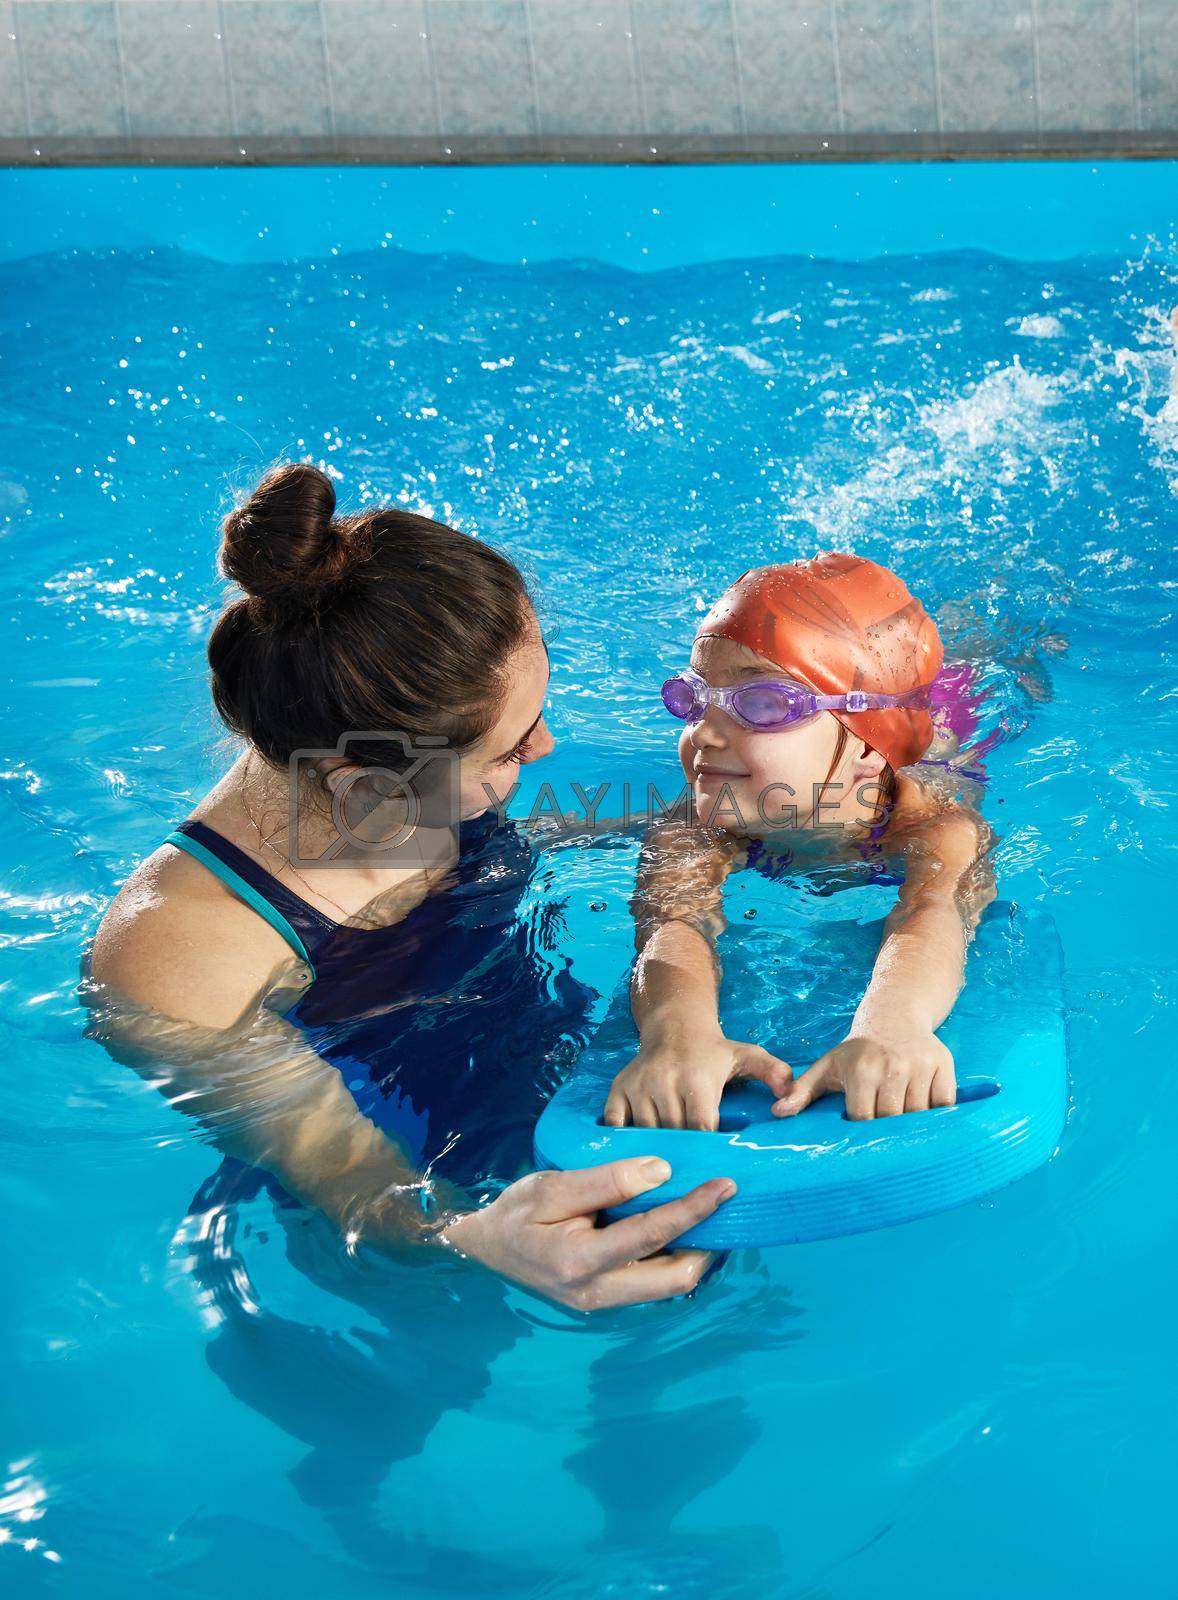 Royalty free image of Little girl learning to swim in indoor pool with pool board and trainer by Mariakray